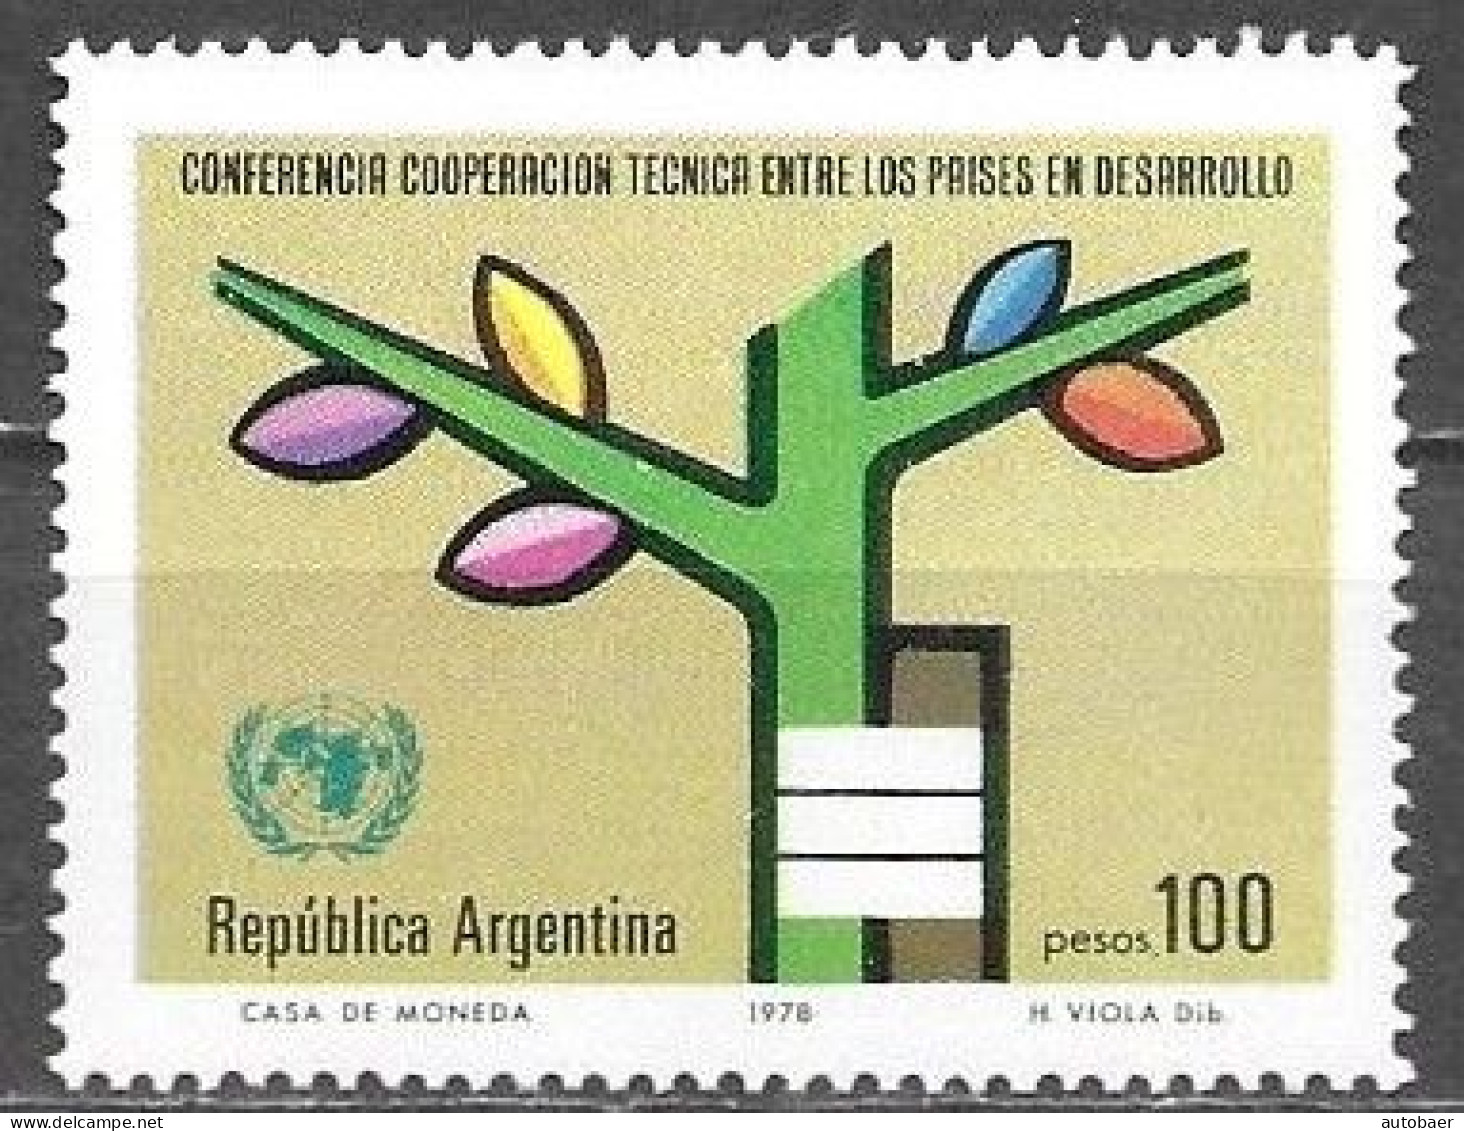 Argentina 1978 Conferencia Cooperacion Conference Cooperation Developing Countries Mi. 1353 MNH Postfrisch Neuf ** - Nuevos